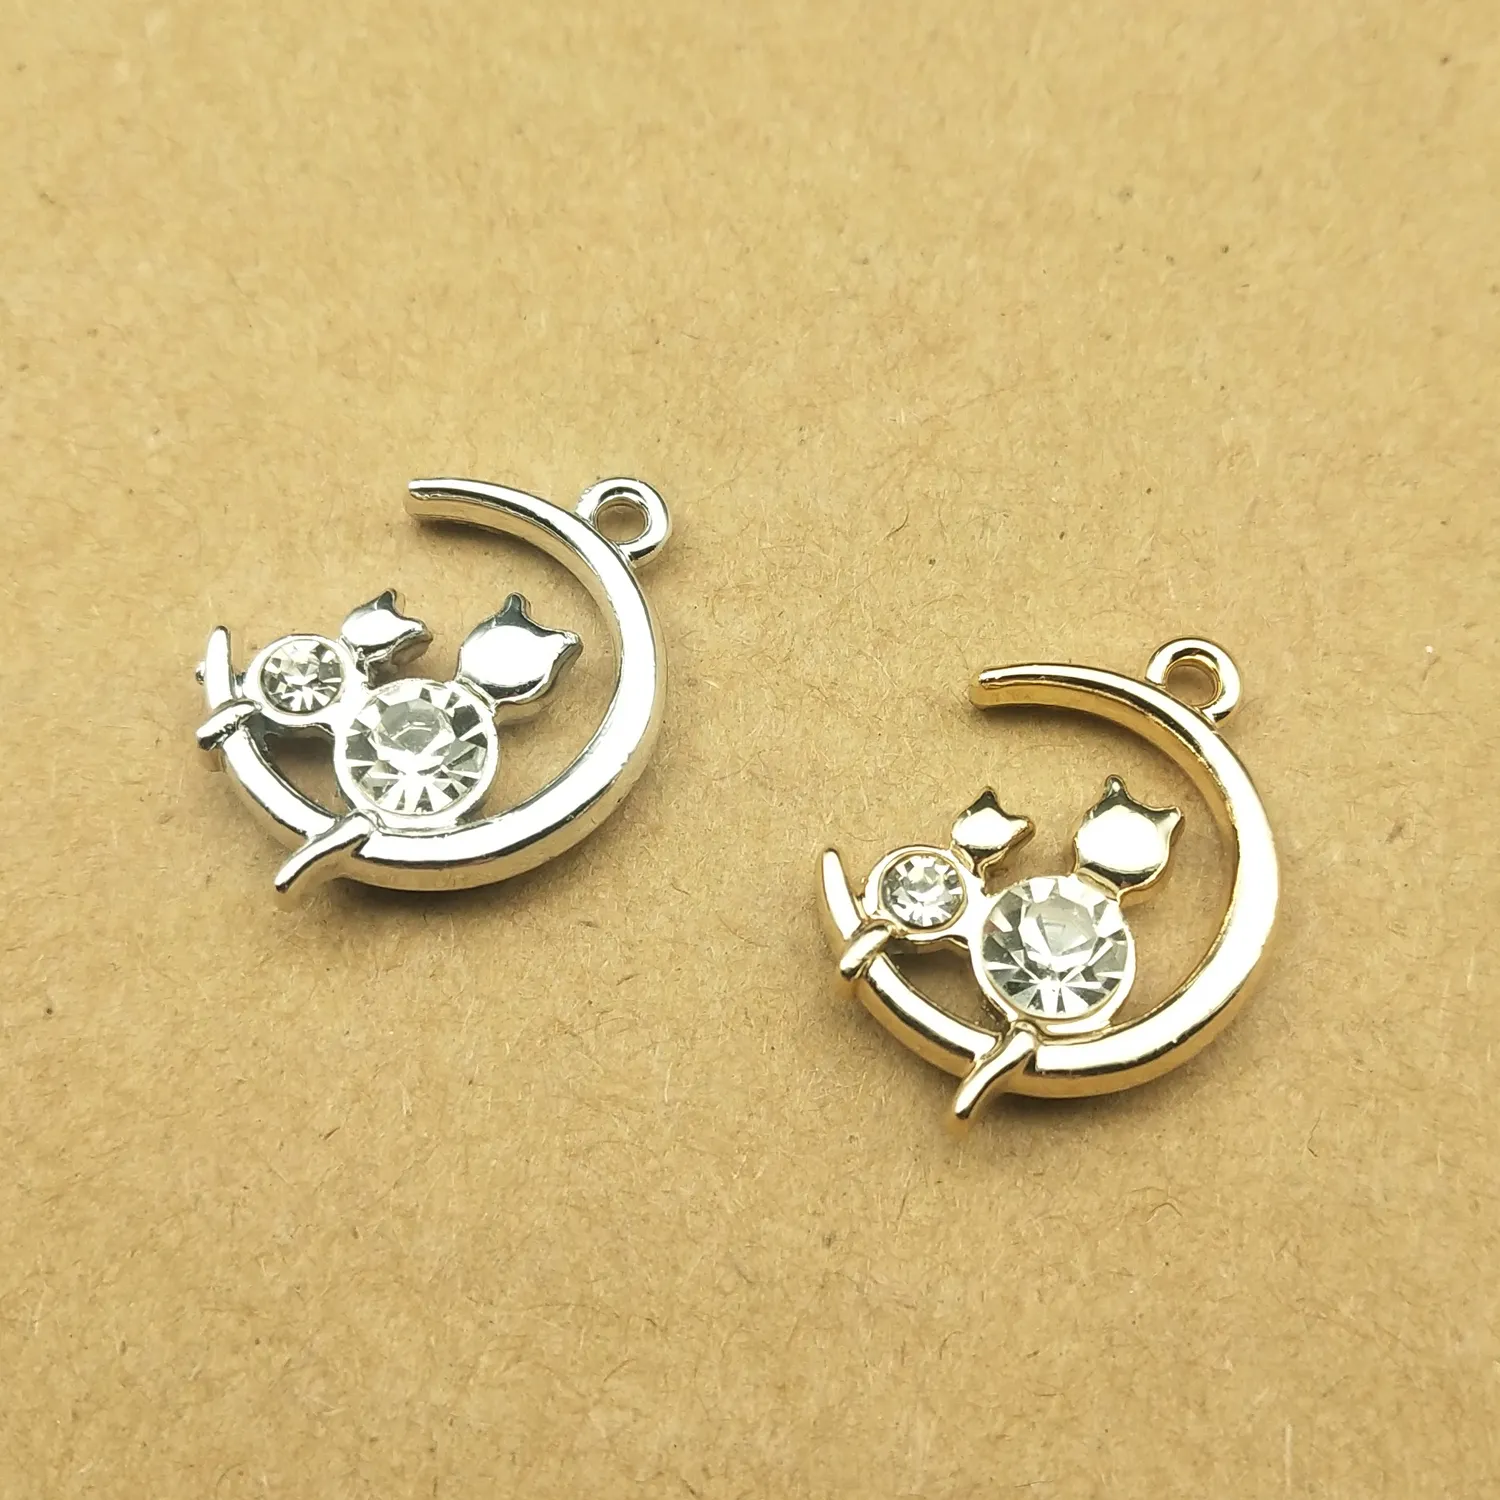 10 Crystal Cat Moon Charms For Jewelry Making 15x22mm Earrings